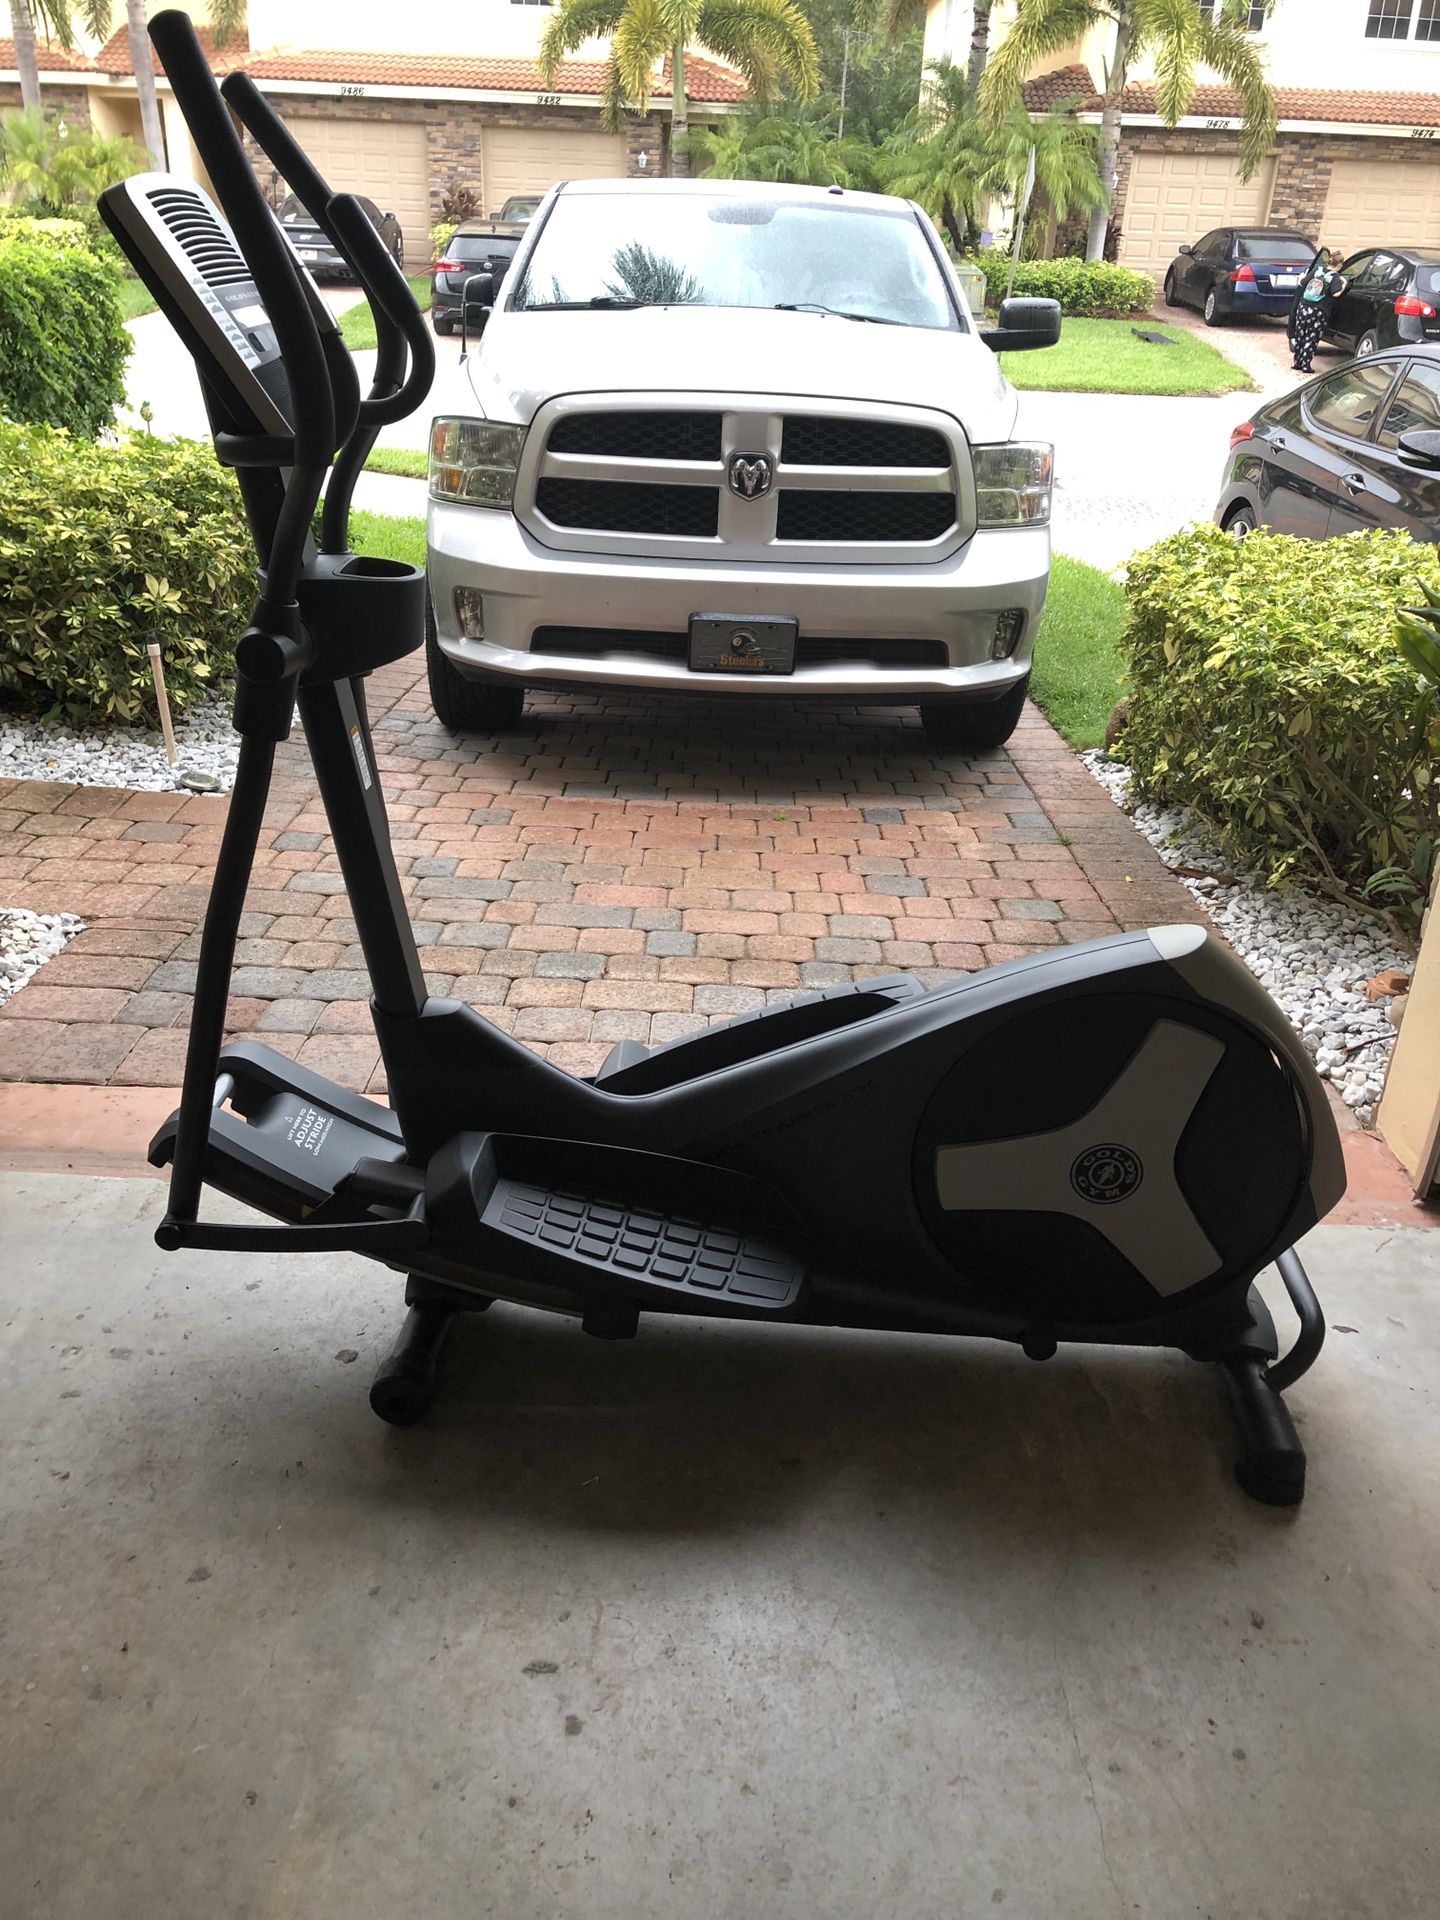 GOLDS GYM Stride Trainer 595 with extra console